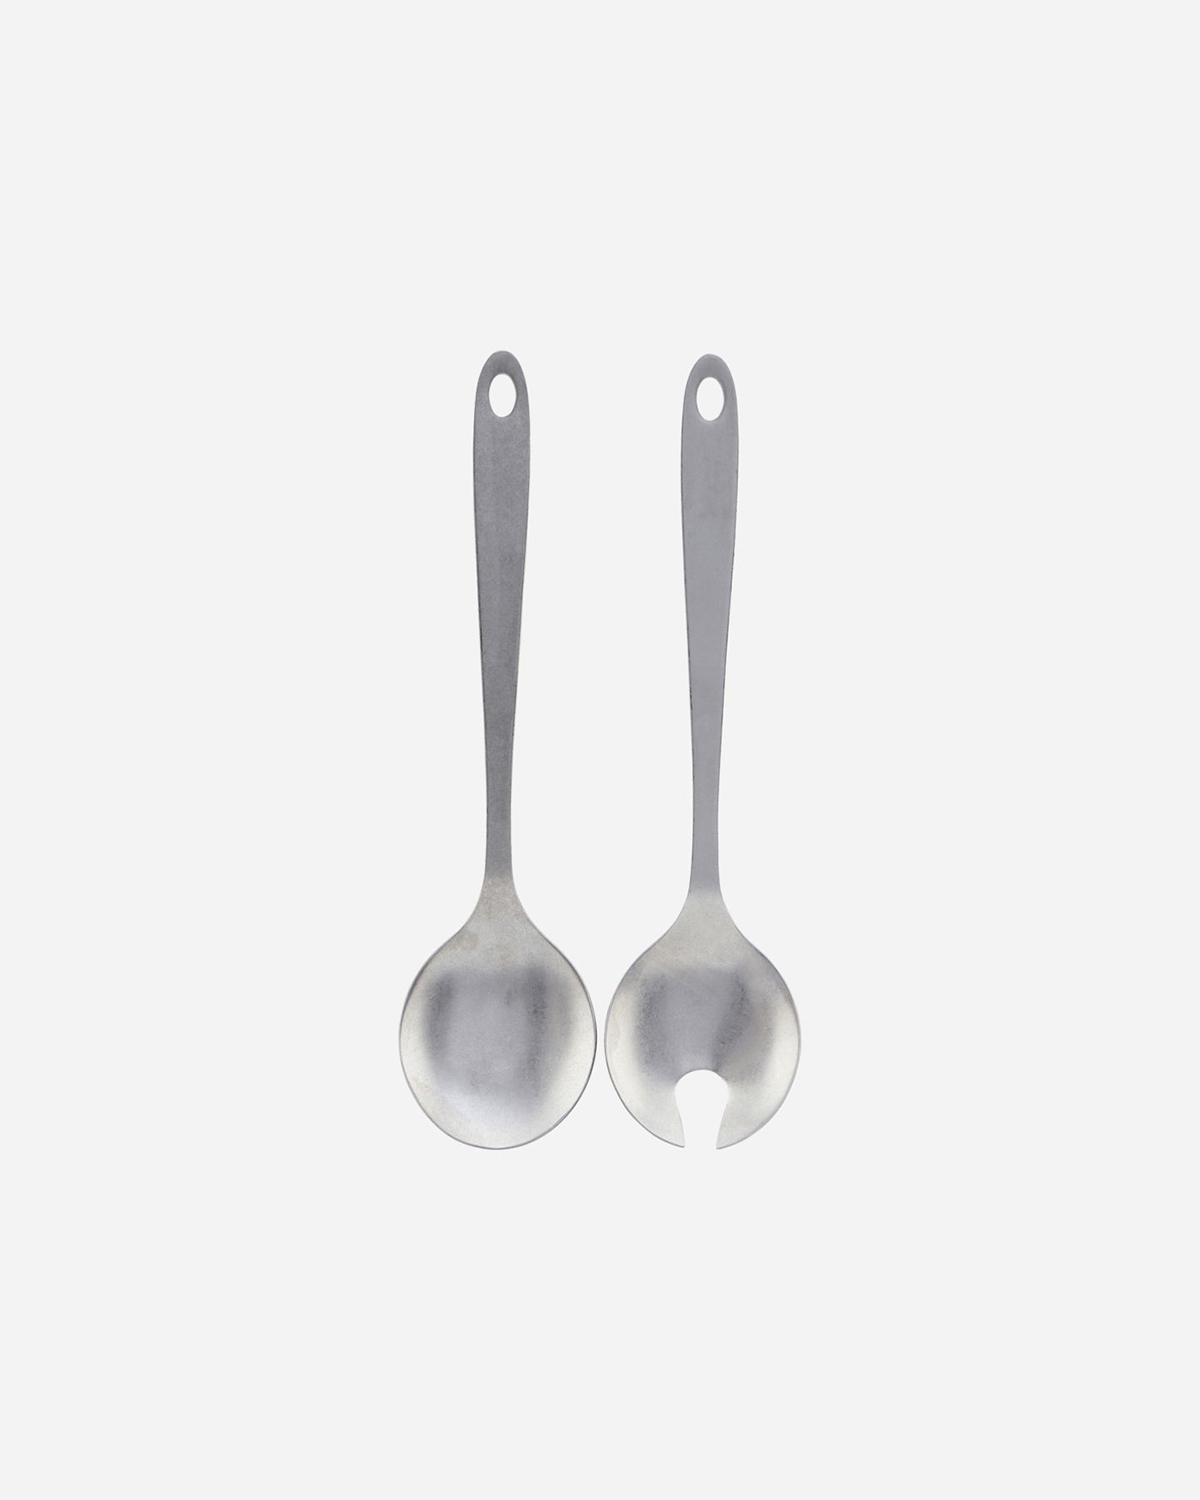 Salad servers, Daily, Pack of 2 pcs